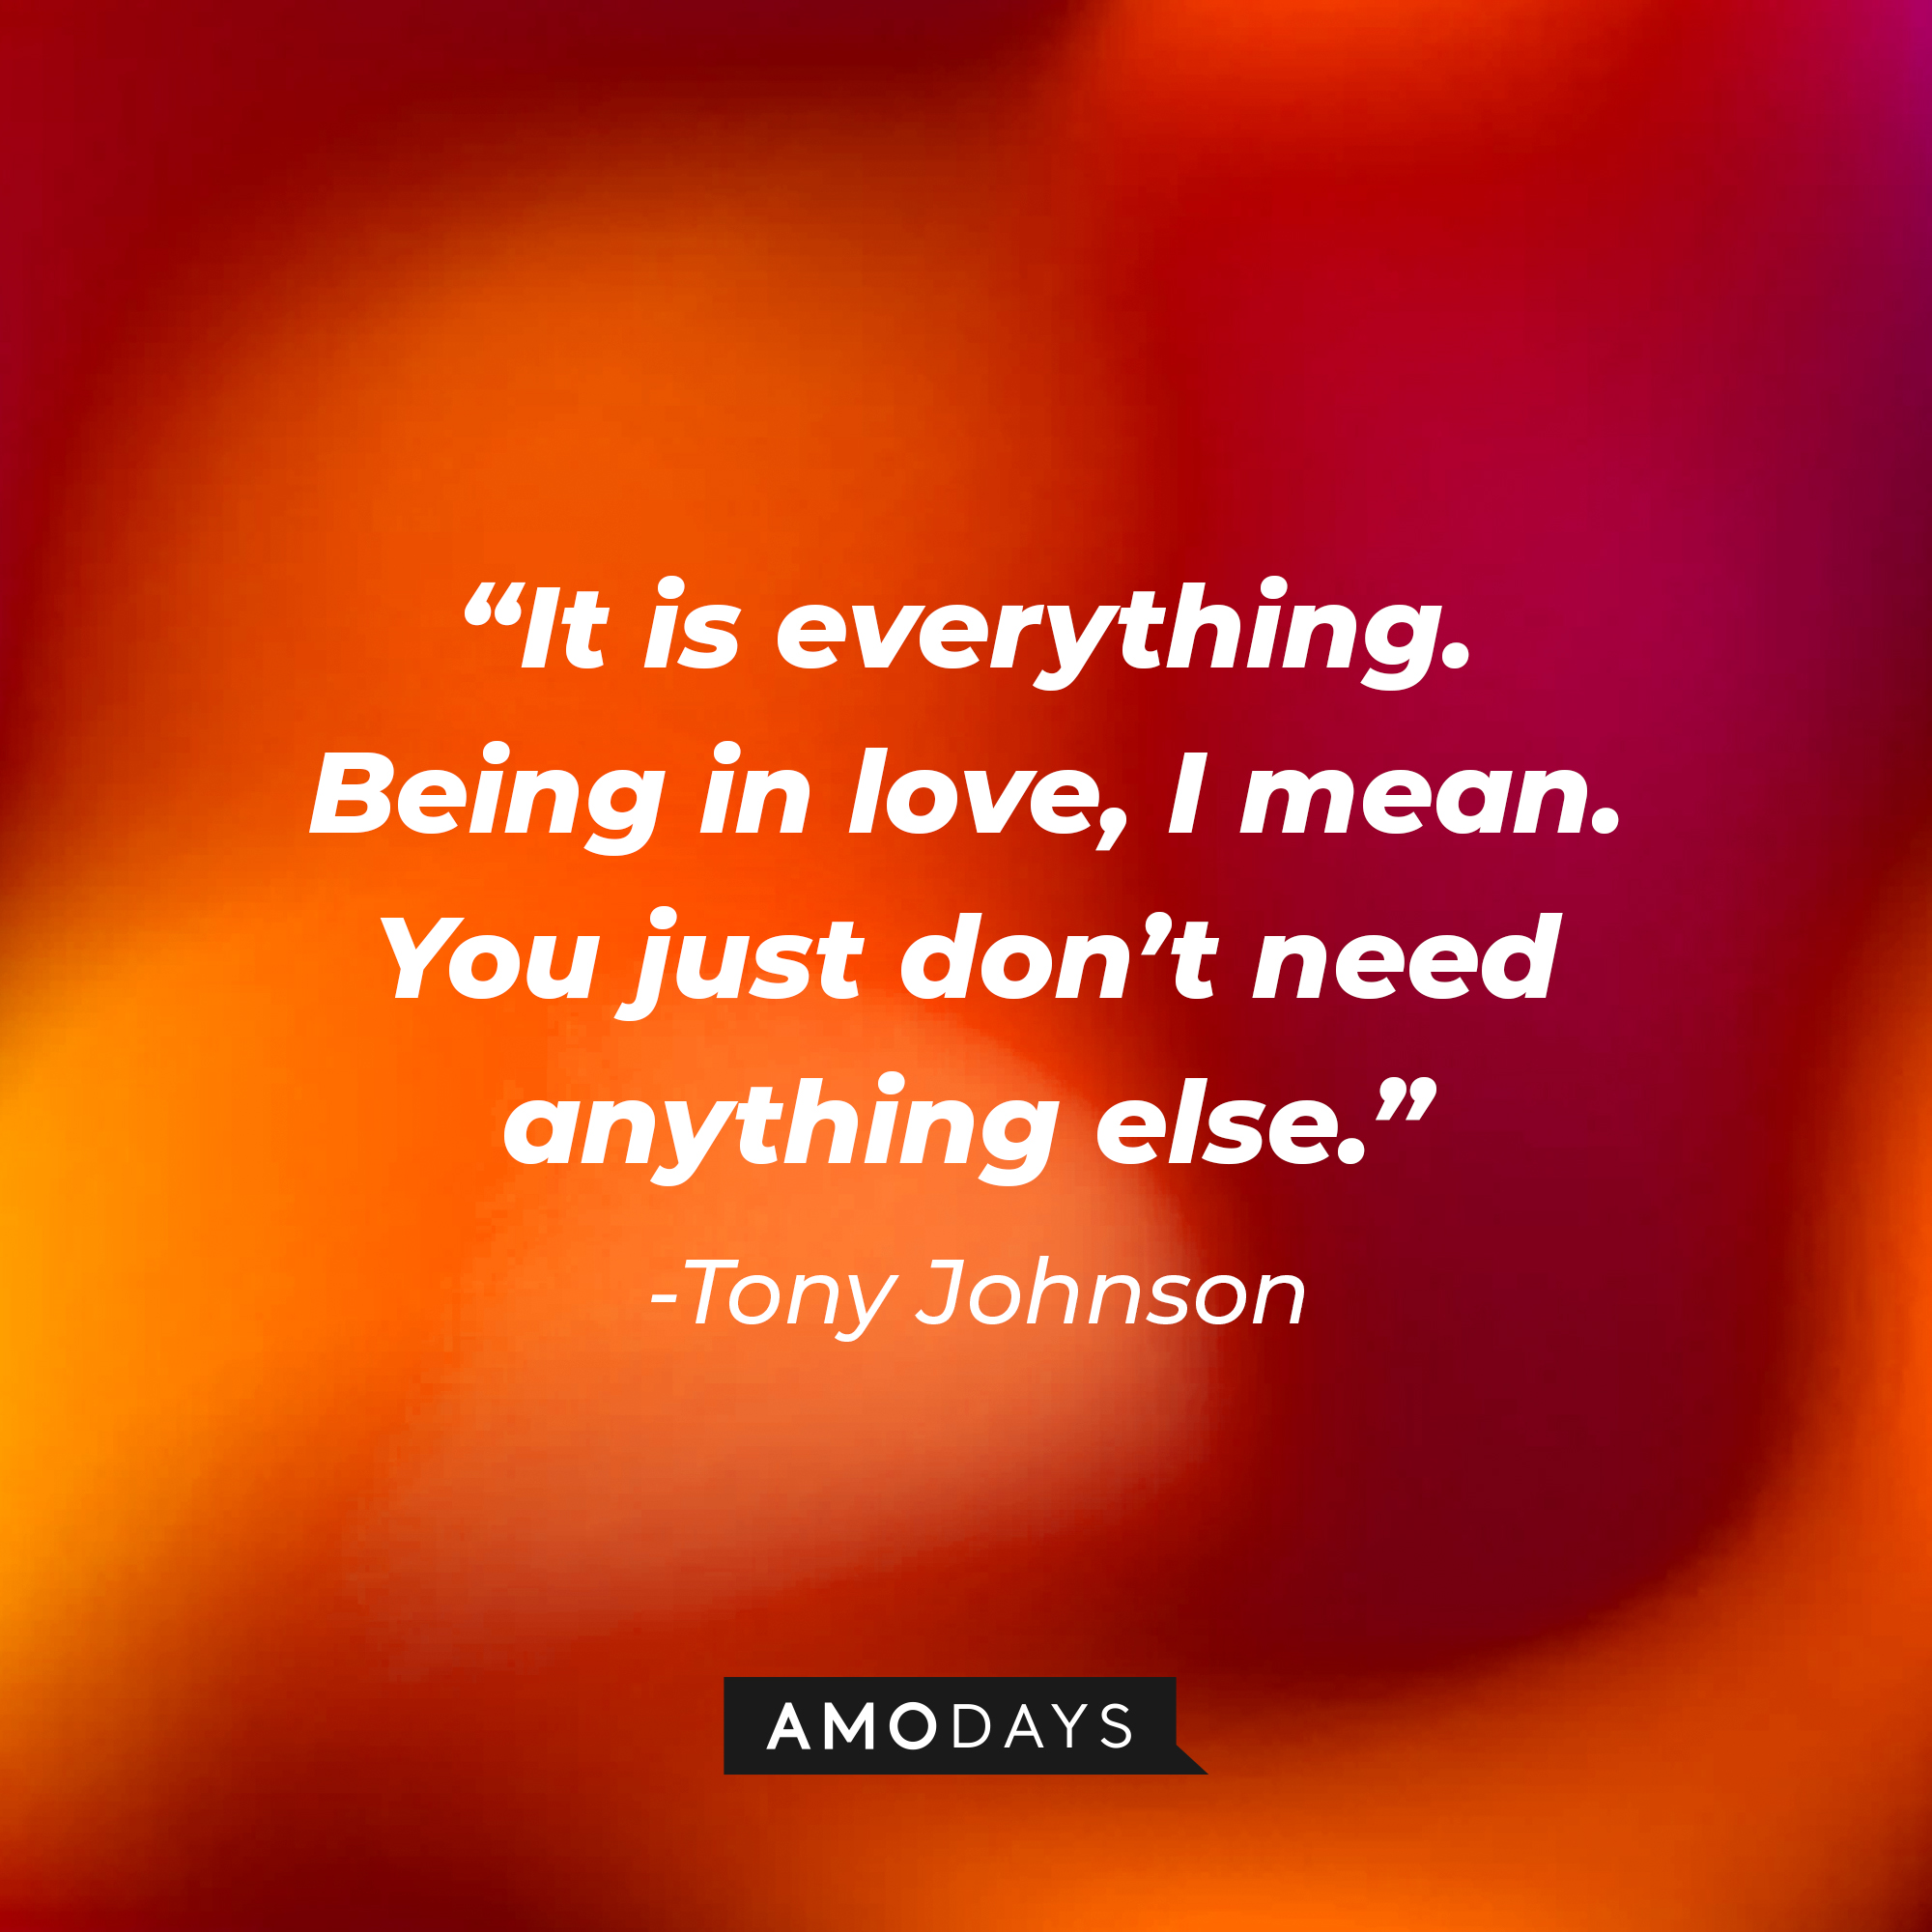 Tony Johnson’s quote: “It is everything. Being in love, I mean. You just don’t need anything else.”  |  Source: AmoDays